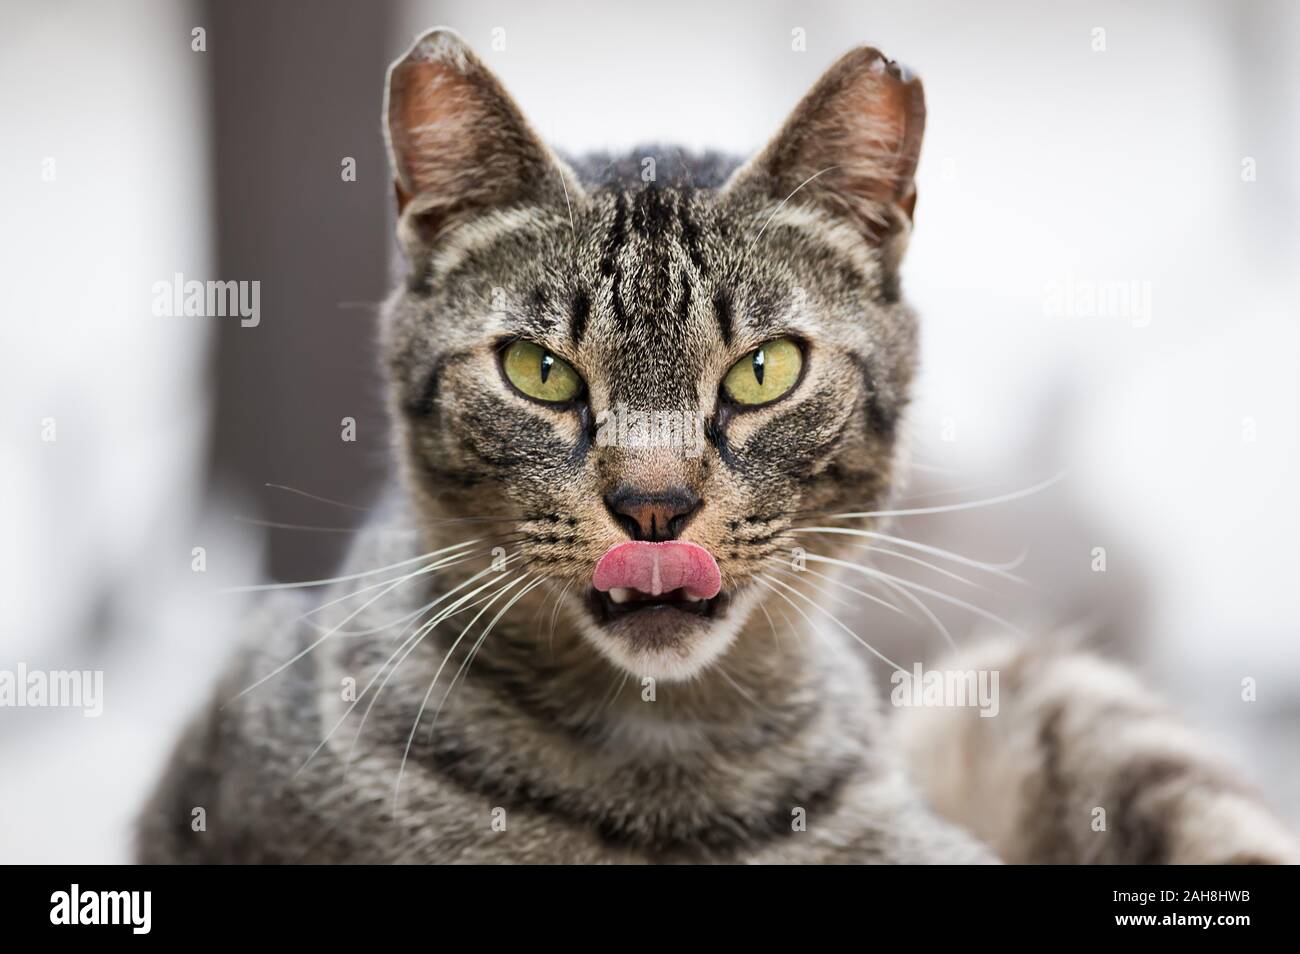 Close up portrait of a male tabby cat staring at the camera and sticking its tongue out, against a bokeh background Stock Photo